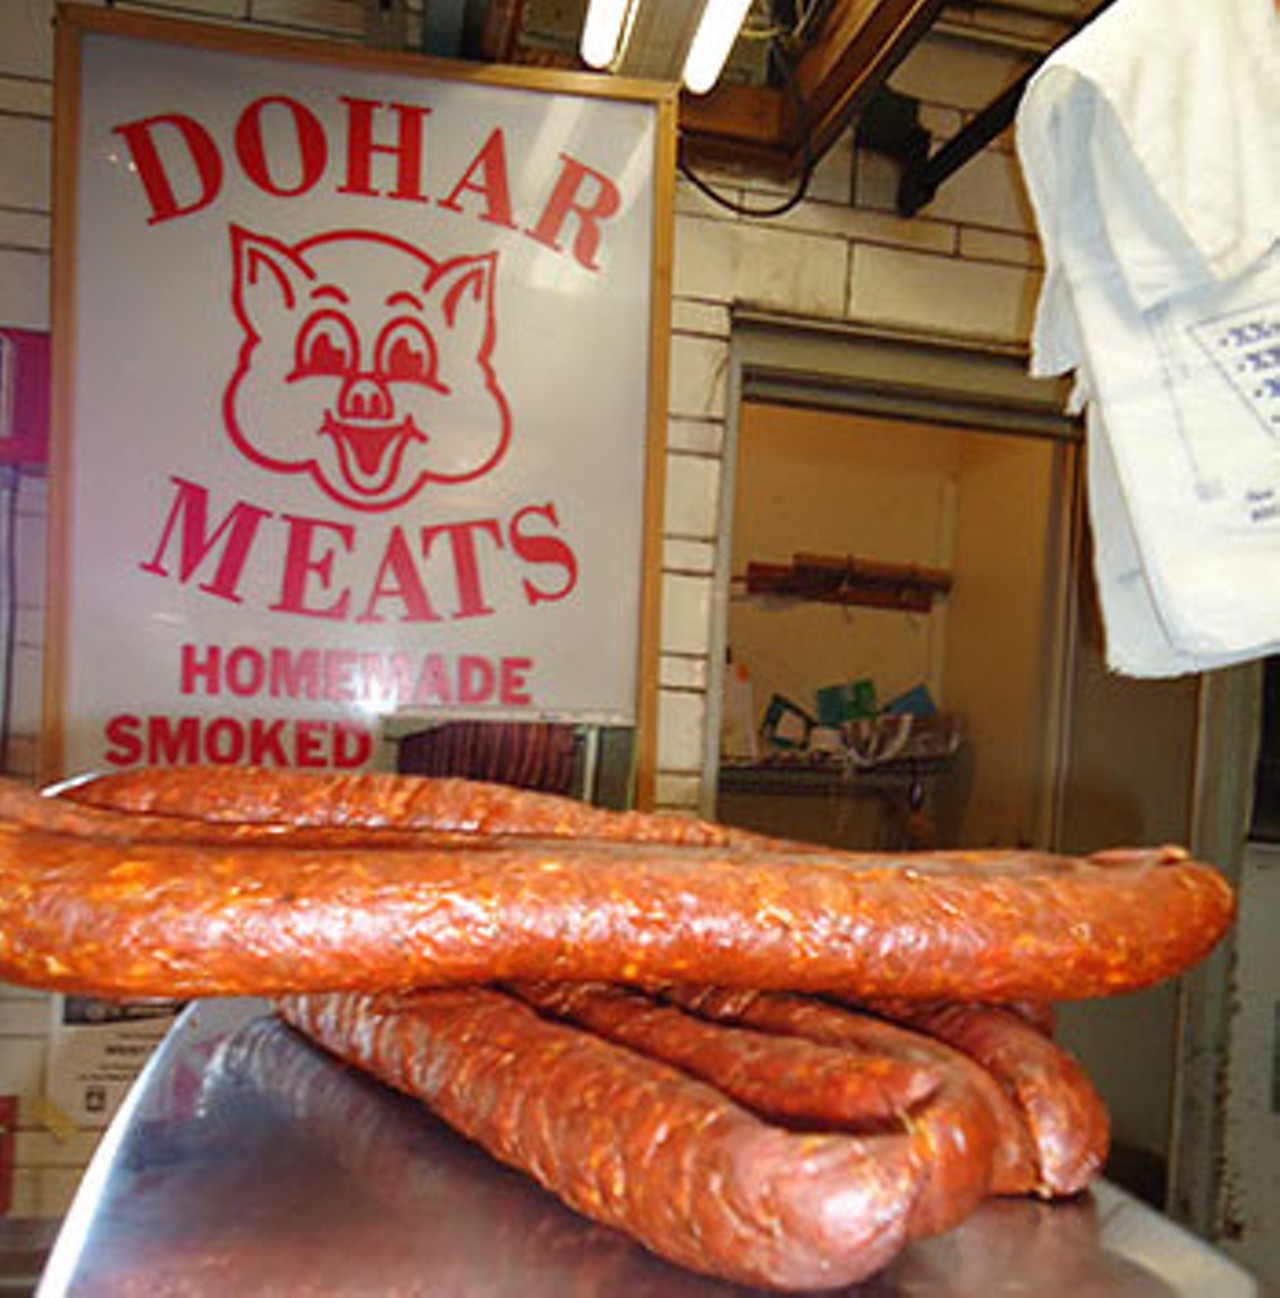  Dohar/Lovaszy Meats
1979 West 25th St., Cleveland 
One of the oldest stands in the West Side Market, Dohar/Lovaszy Meats was founded by Emery Lovaszy in the late 1940s and Steve Dohar joined him in 1951. They started off by making house-cured and smoked natural meats, which they still sell today. Steve Dohar&#146;s daughter Angela and her husband Miklos took over the stand in 1987 and still run it today.
Photo via Westsidemarket.org